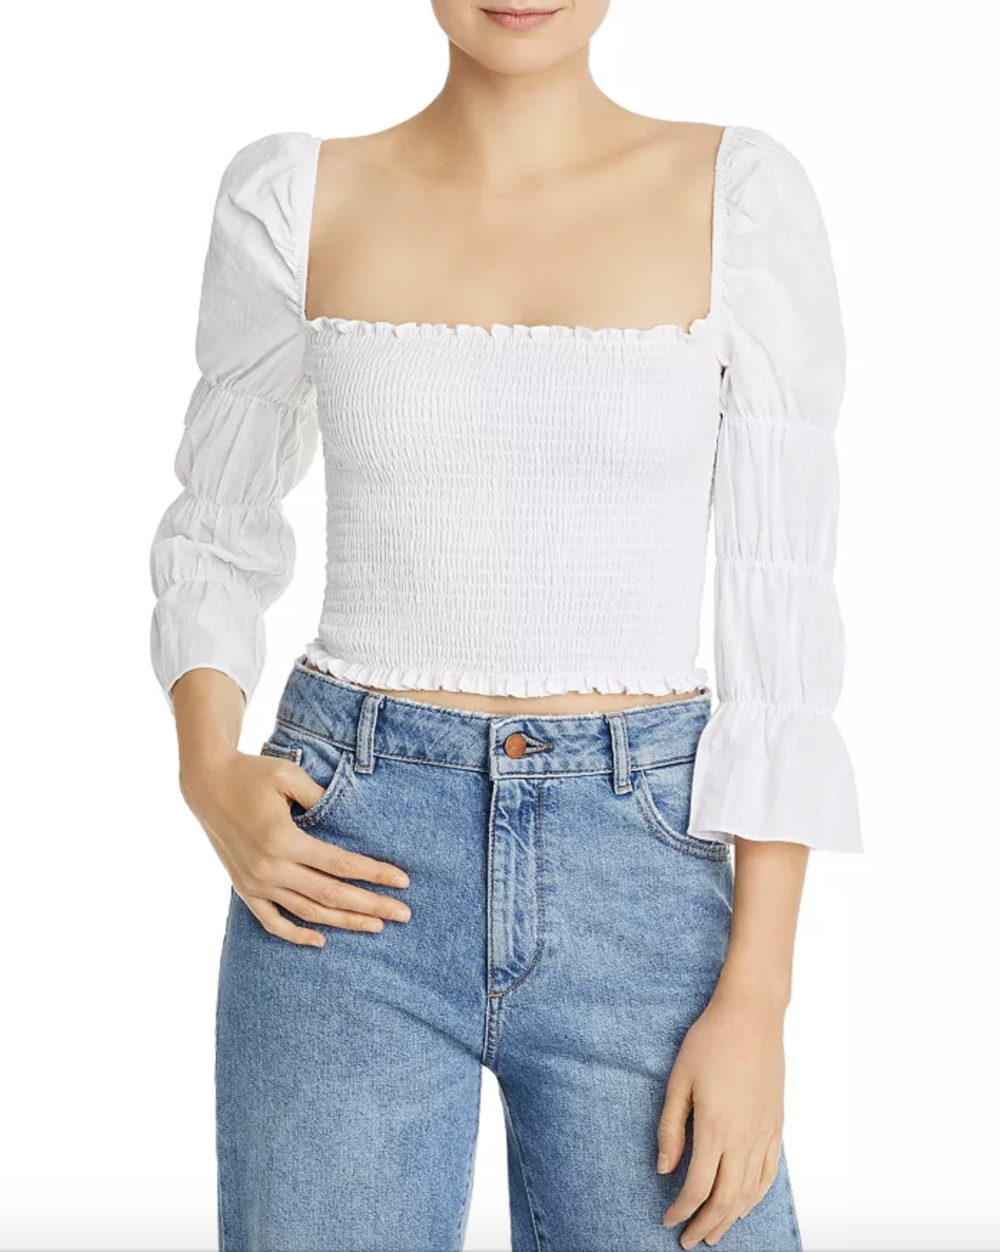 Smocked Top $40.60 (30% OFF)